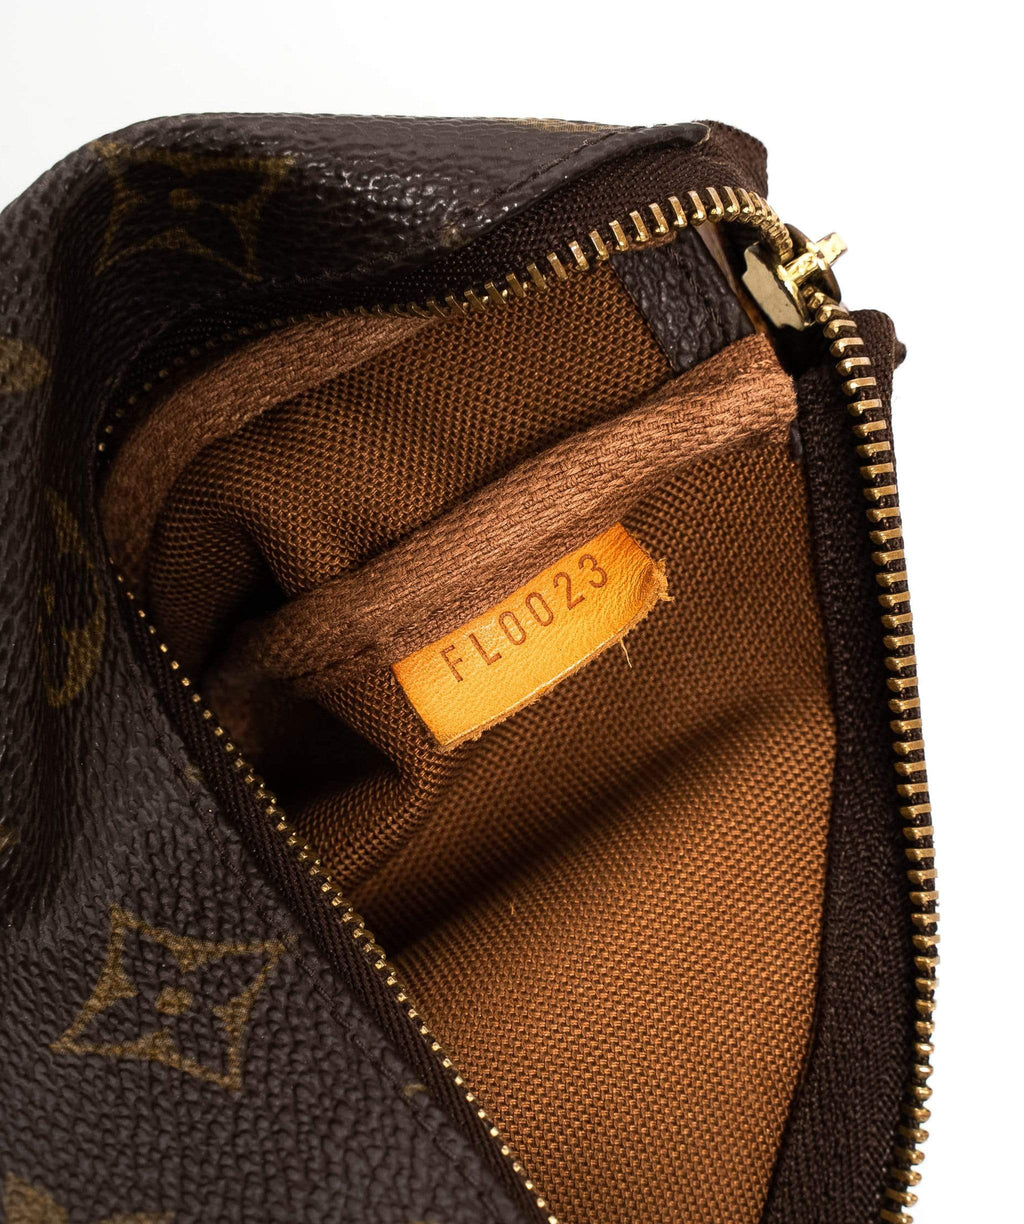 Louis Vuitton on X: Unfailingly modern. The Pochette Métis is one of the  many #LouisVuitton bags enhanced by the Monogram motif. Find a selection of  new and iconic bags and more at